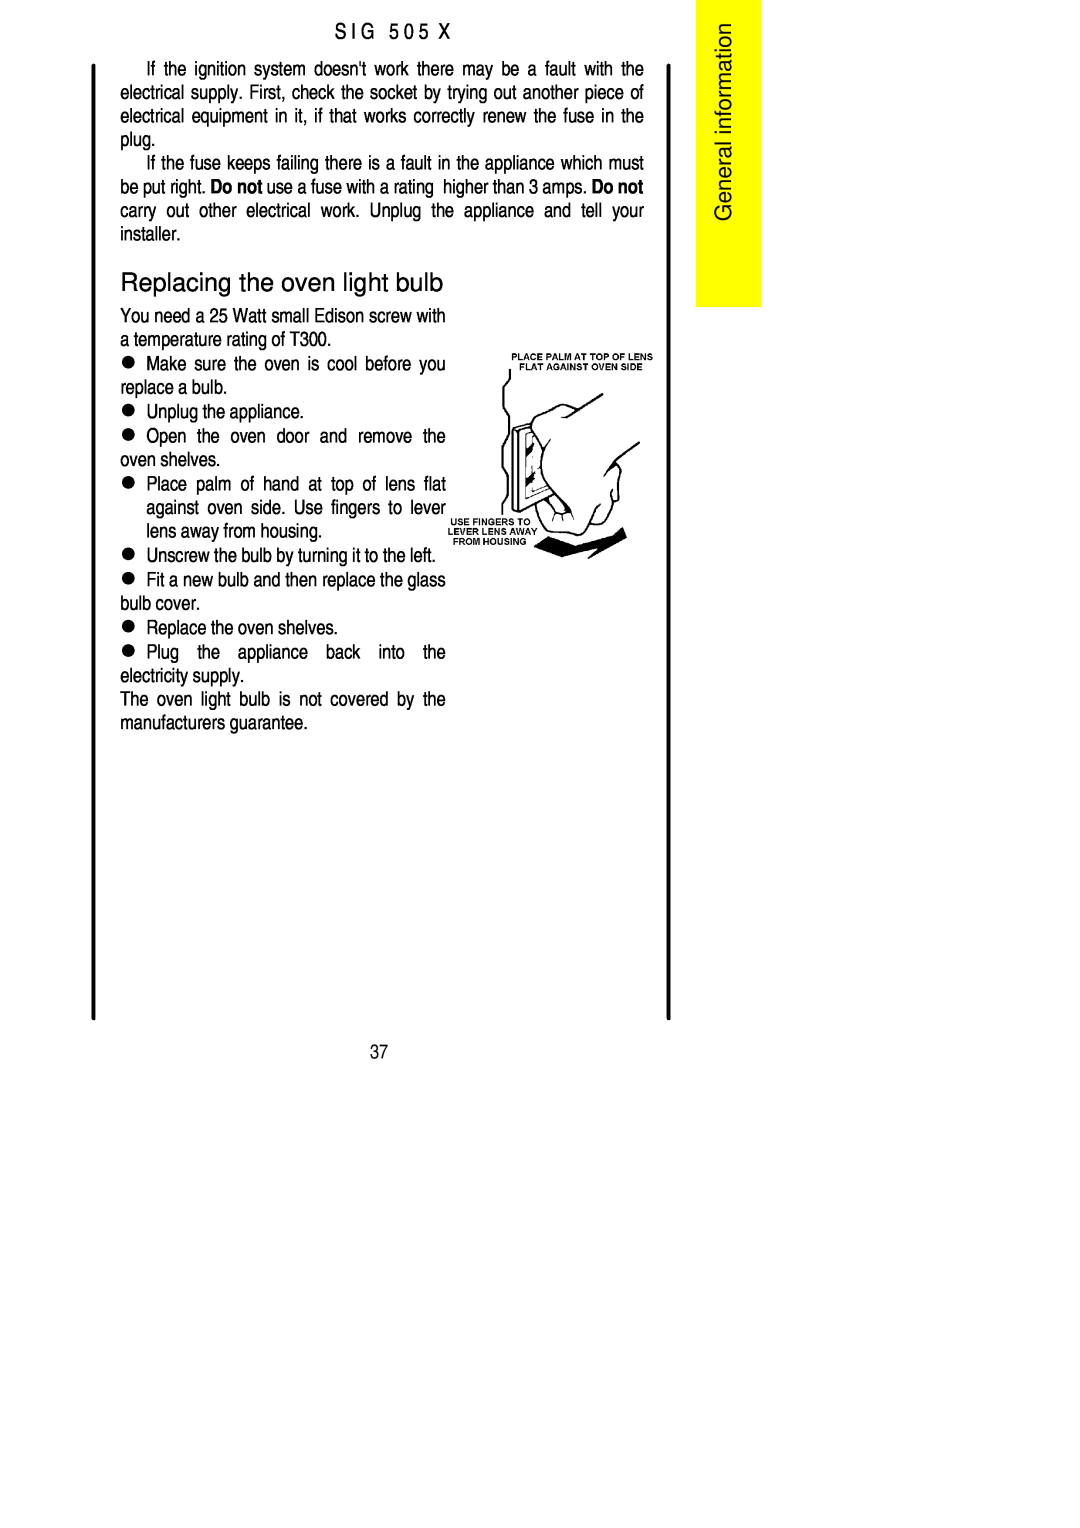 Electrolux SIG 505 X installation instructions Replacing the oven light bulb, General information, S I G 